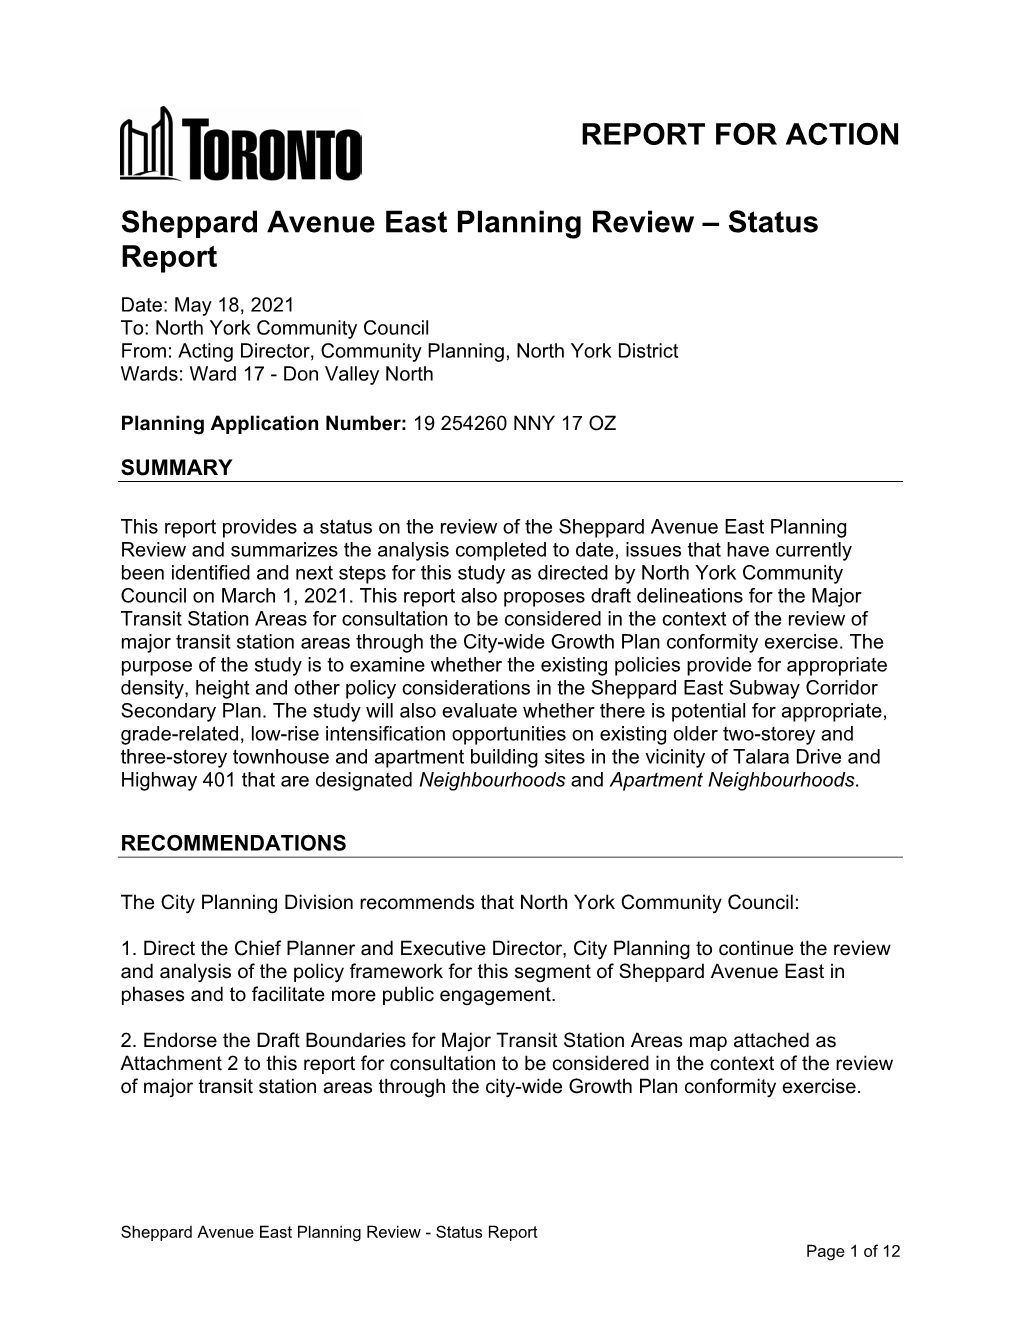 Sheppard Avenue East Planning Review – Status Report